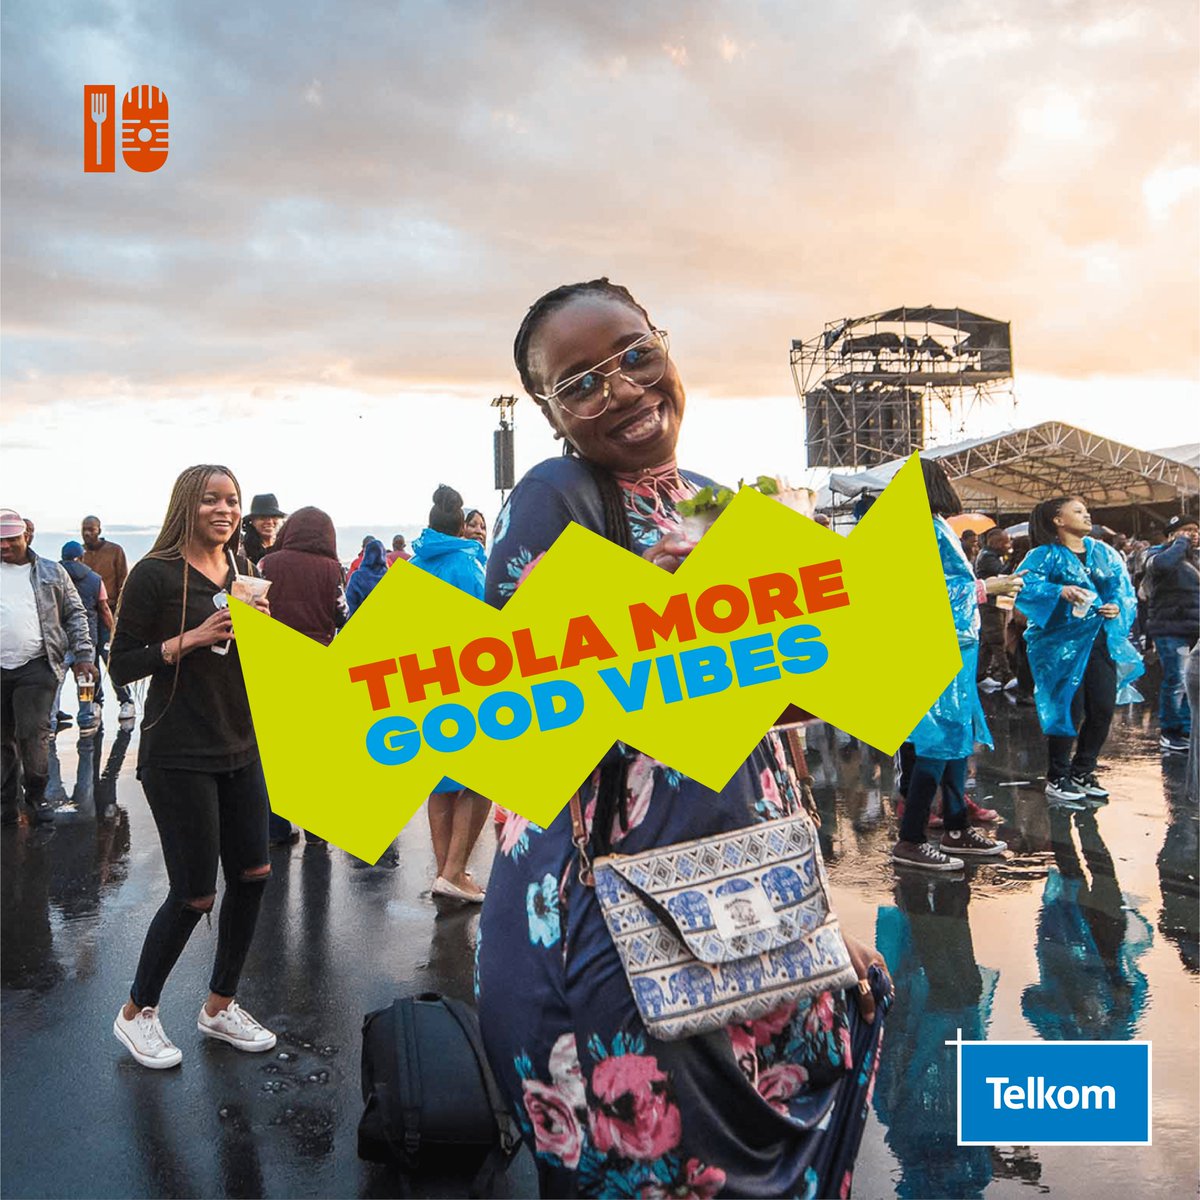 The @TelkomZA Lounge in DStv Home of Entertainment was lush! Keep #DStvDeliciousFestival vibes alive and reminisce about the good times. Share your favourite festival memories and 'Thola More' with Telkom – connecting South Africa for generations.